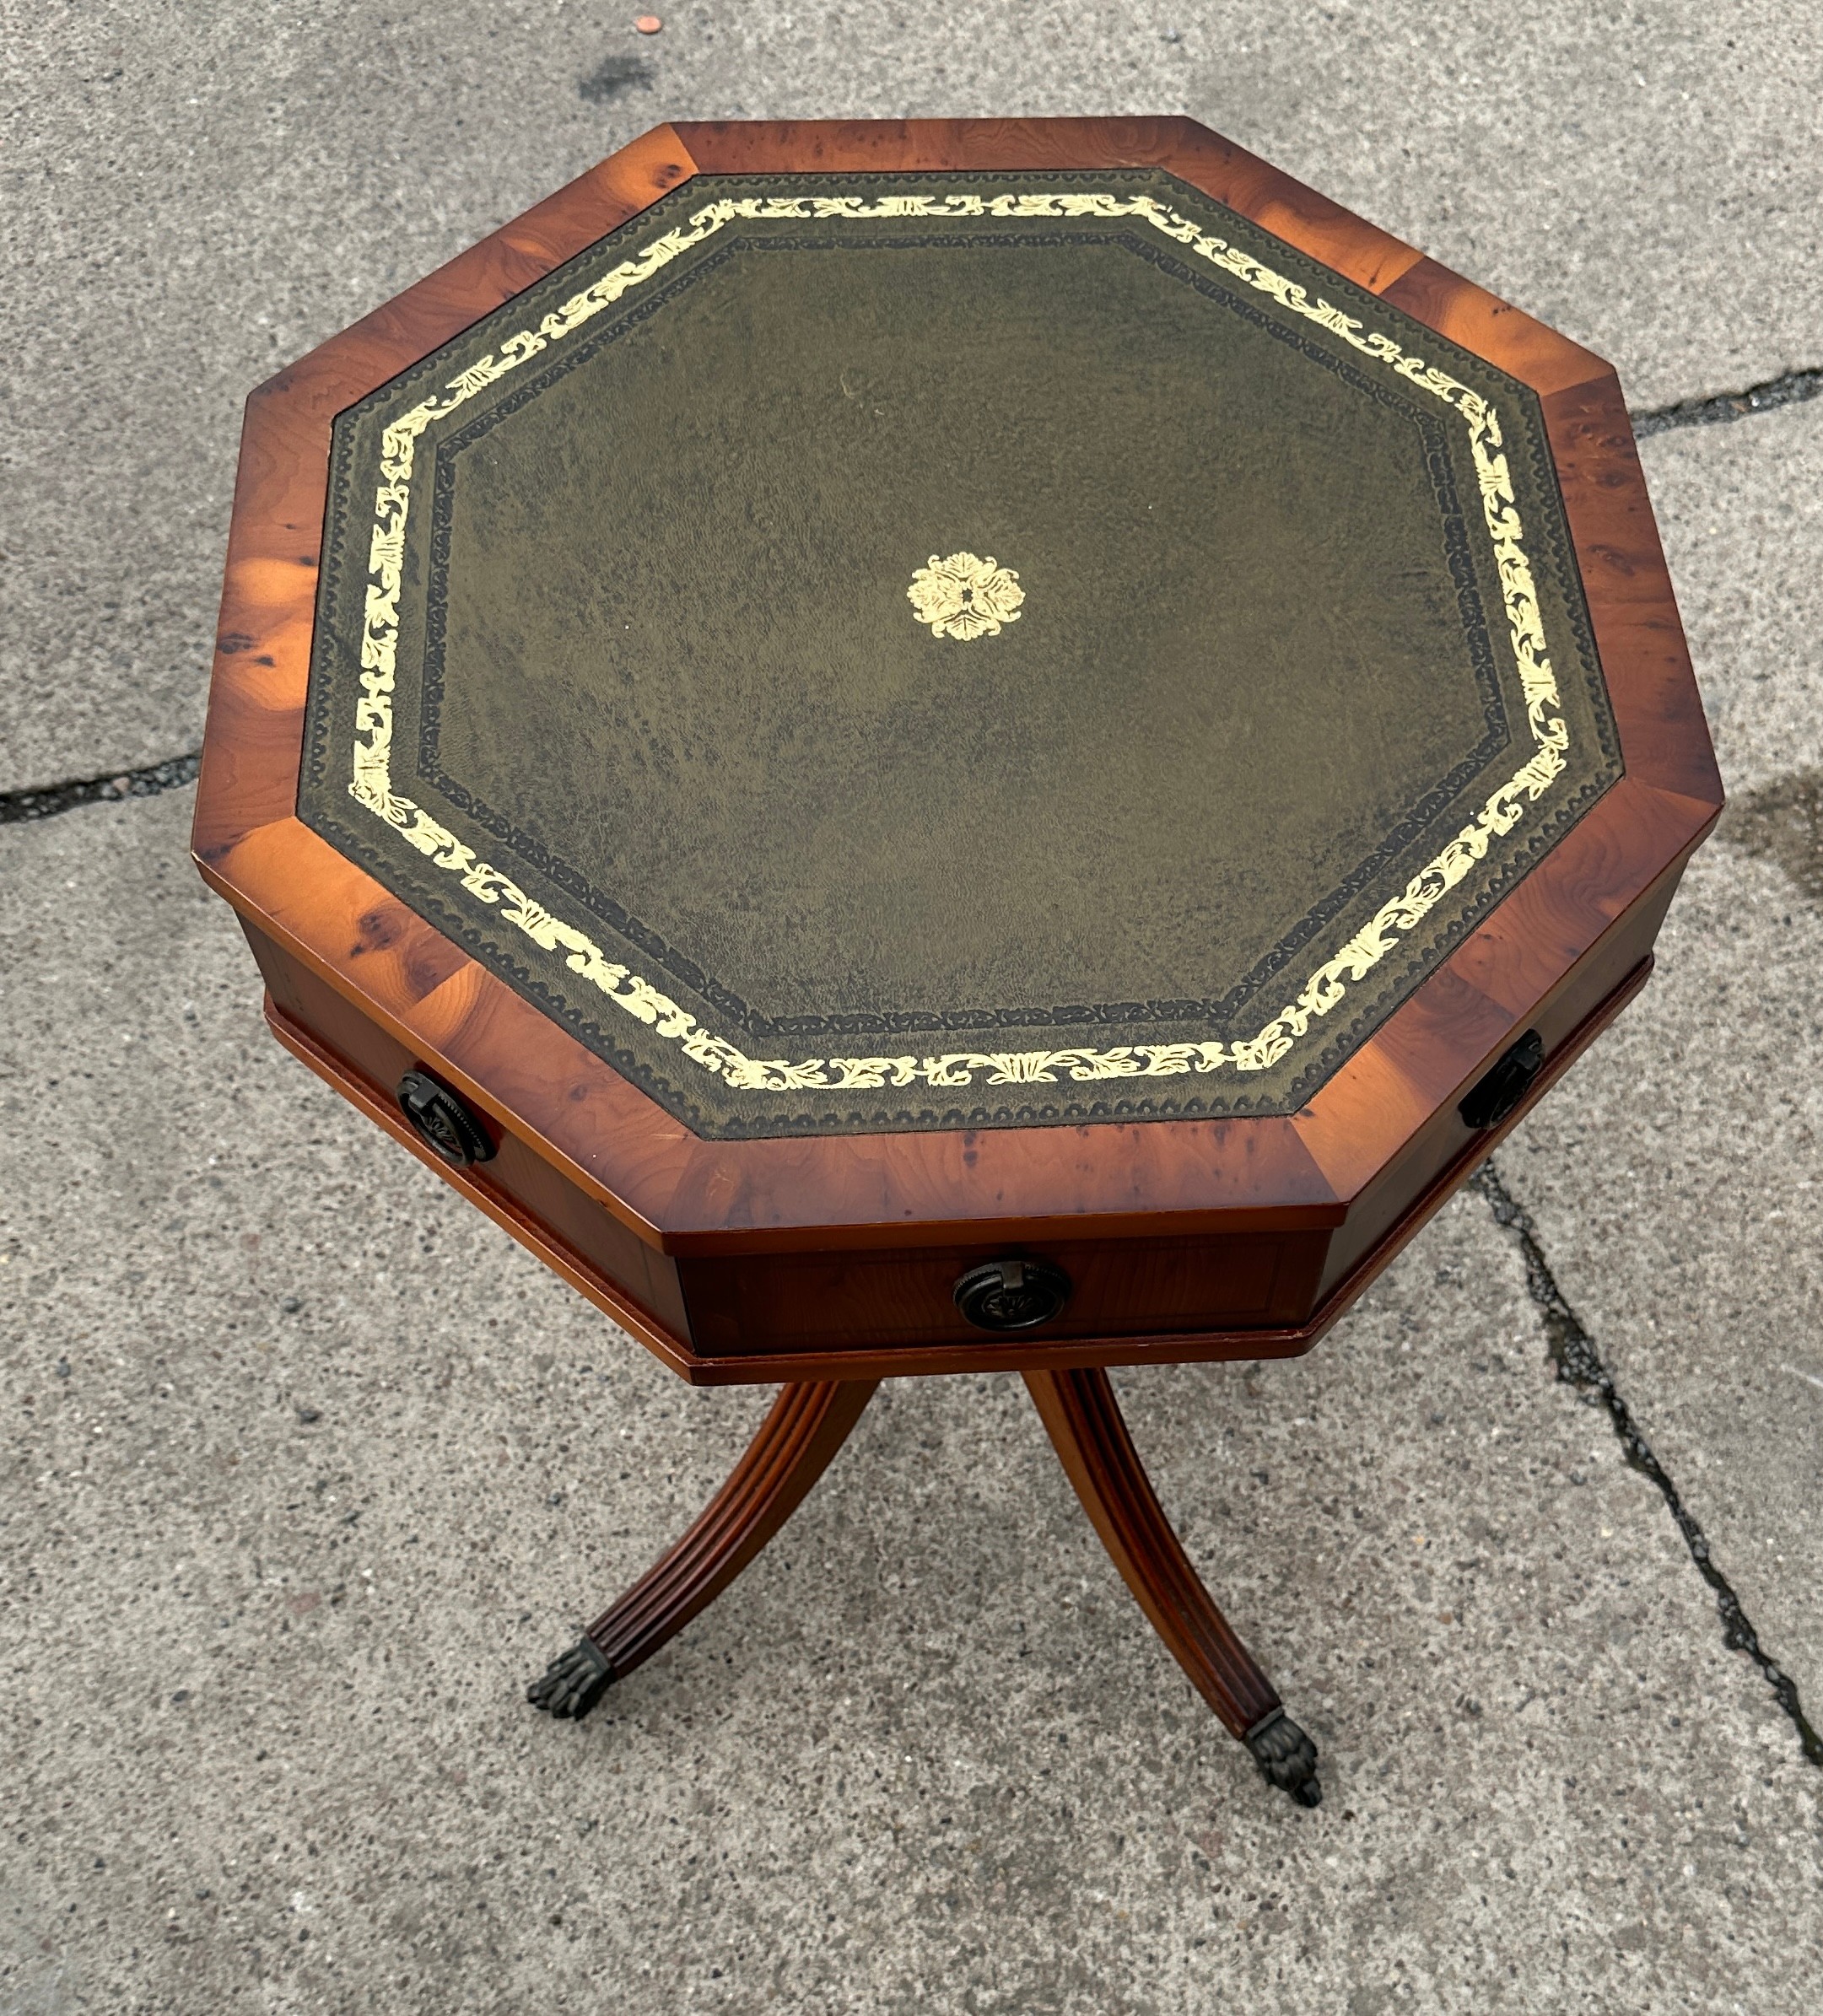 Reproduction leather topped drum table measures approx 26 inches tall - Image 2 of 3